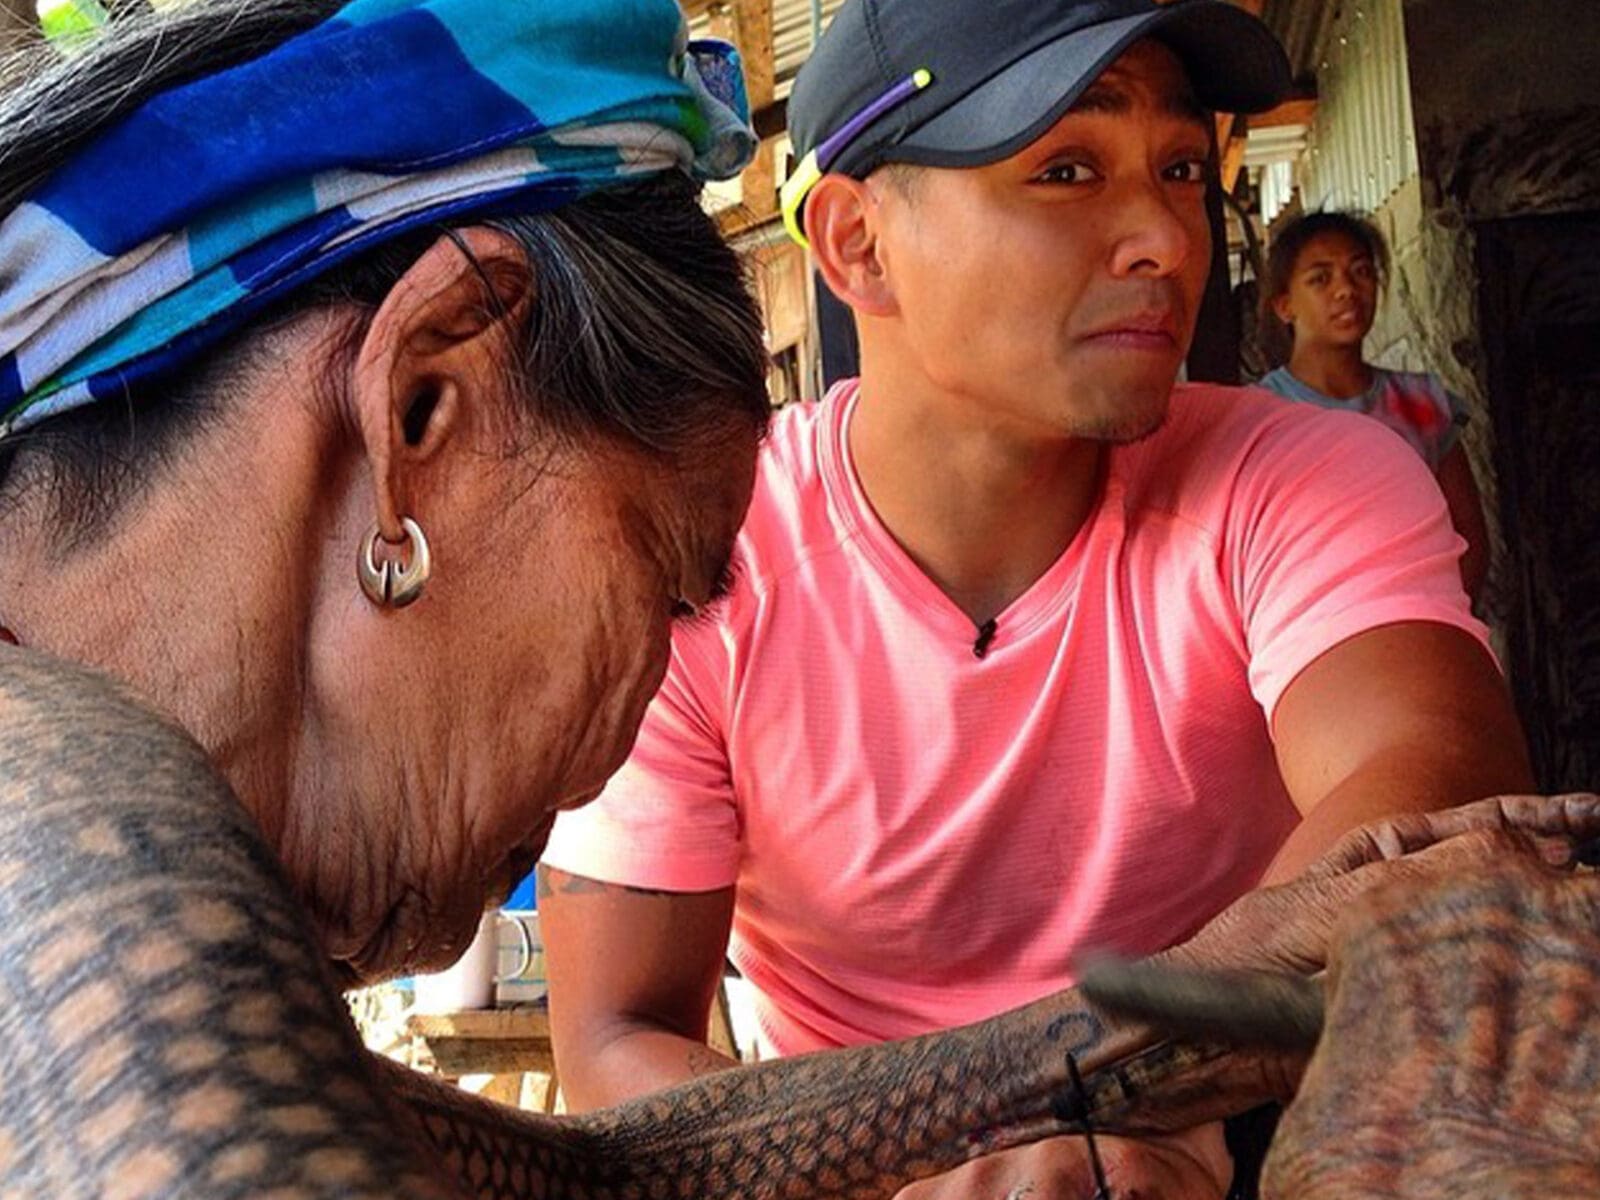 Drew Arellano getting a tattoo from Apo Whang-Od